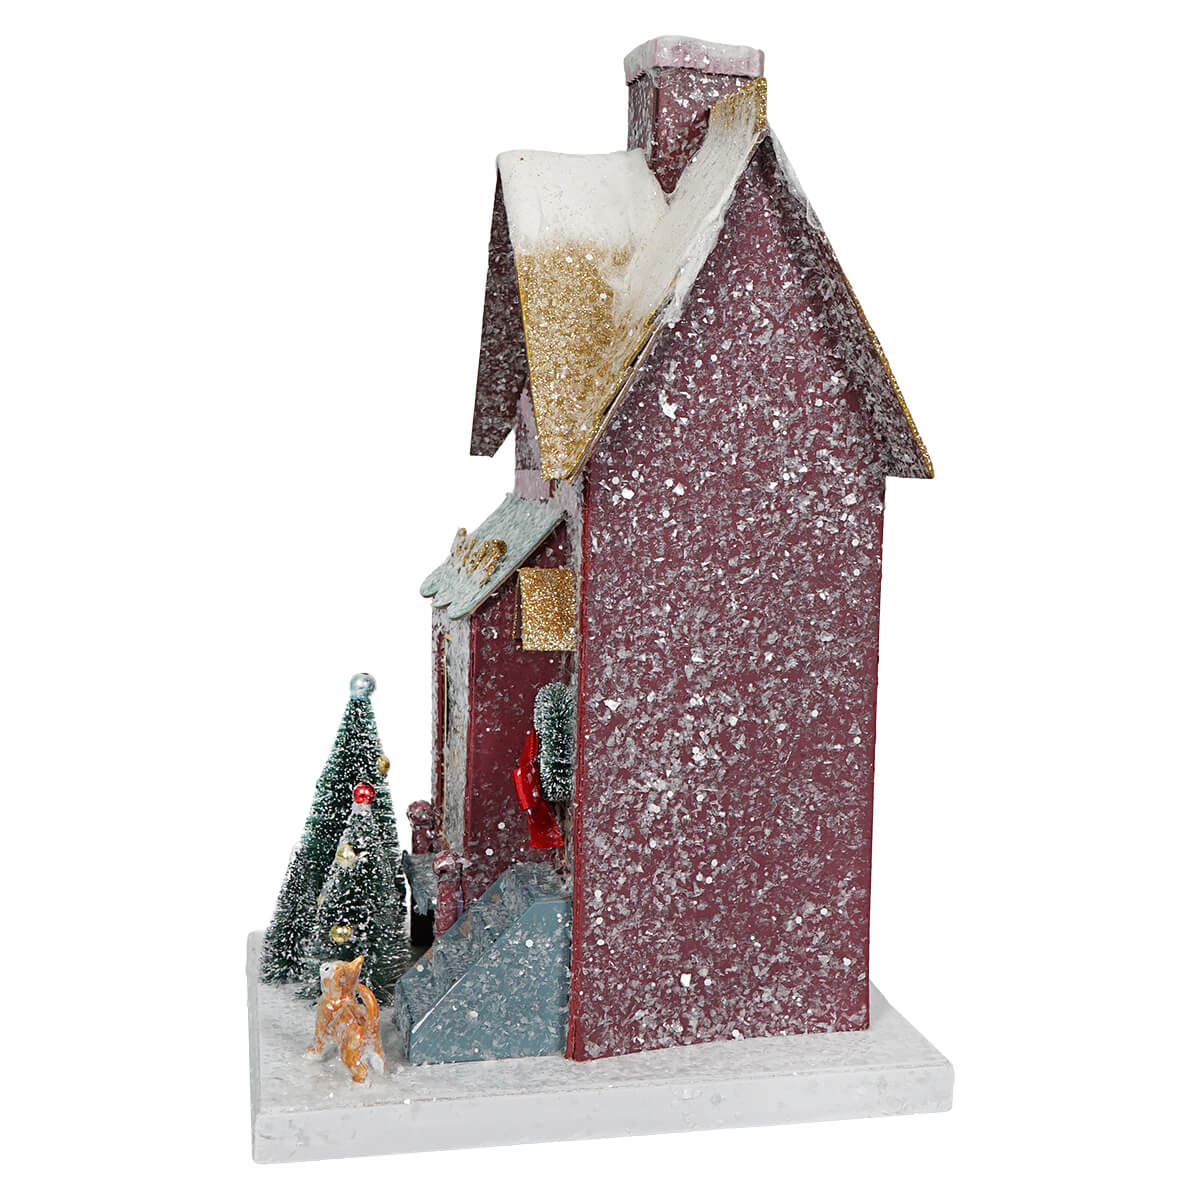 Petite Pink House With Deer – Traditions